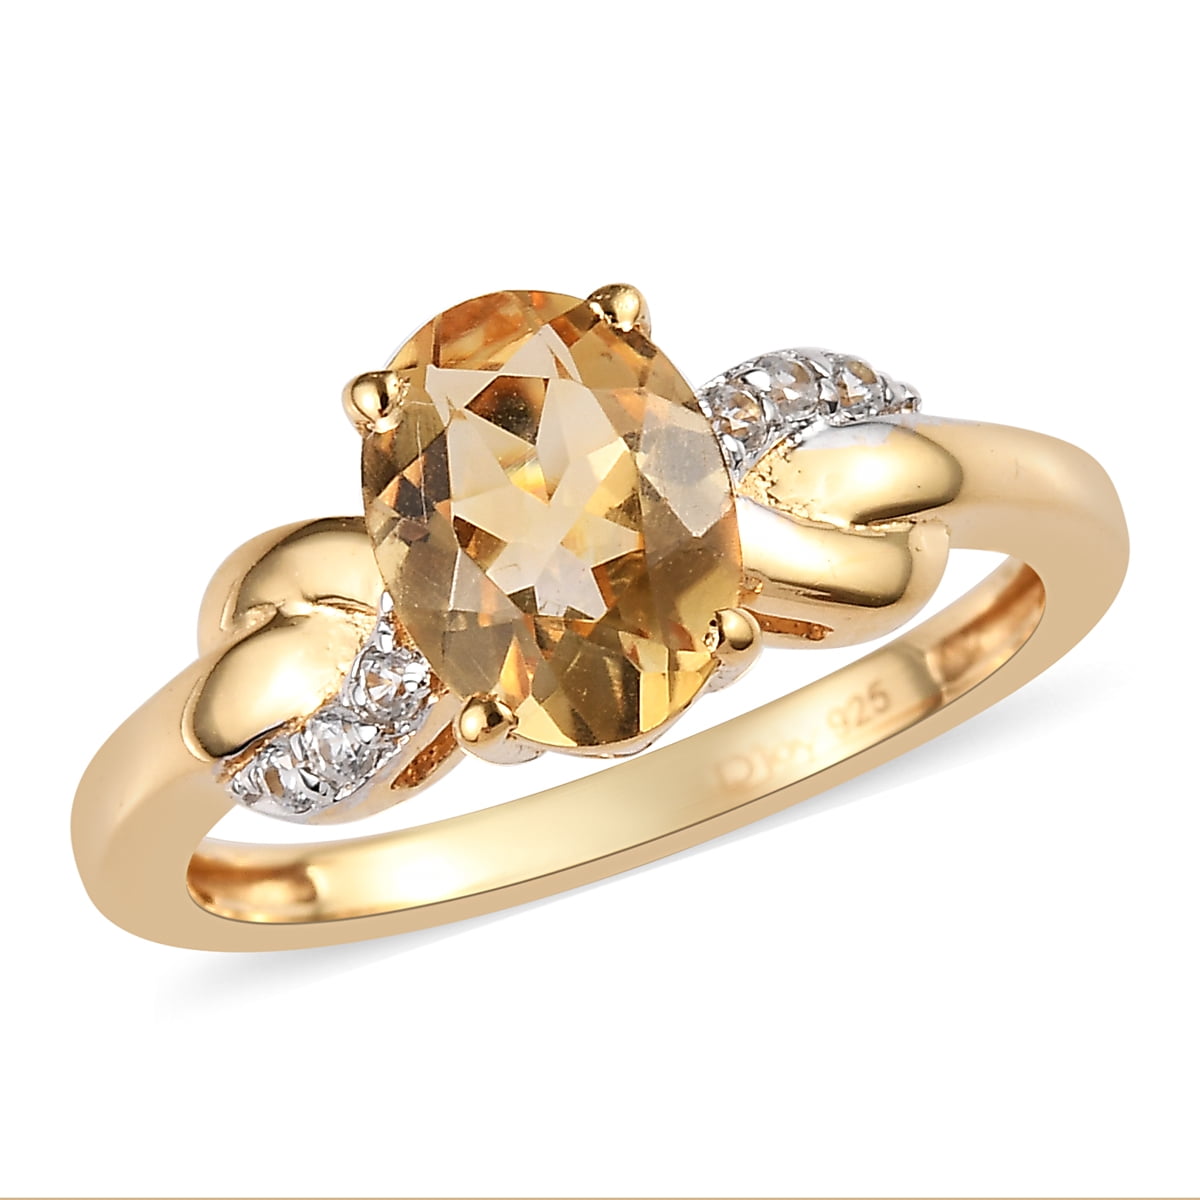 Shop LC Delivering Joy Round Cubic Zircon Champagne Multi Gemstone Fashion Ring for Women 